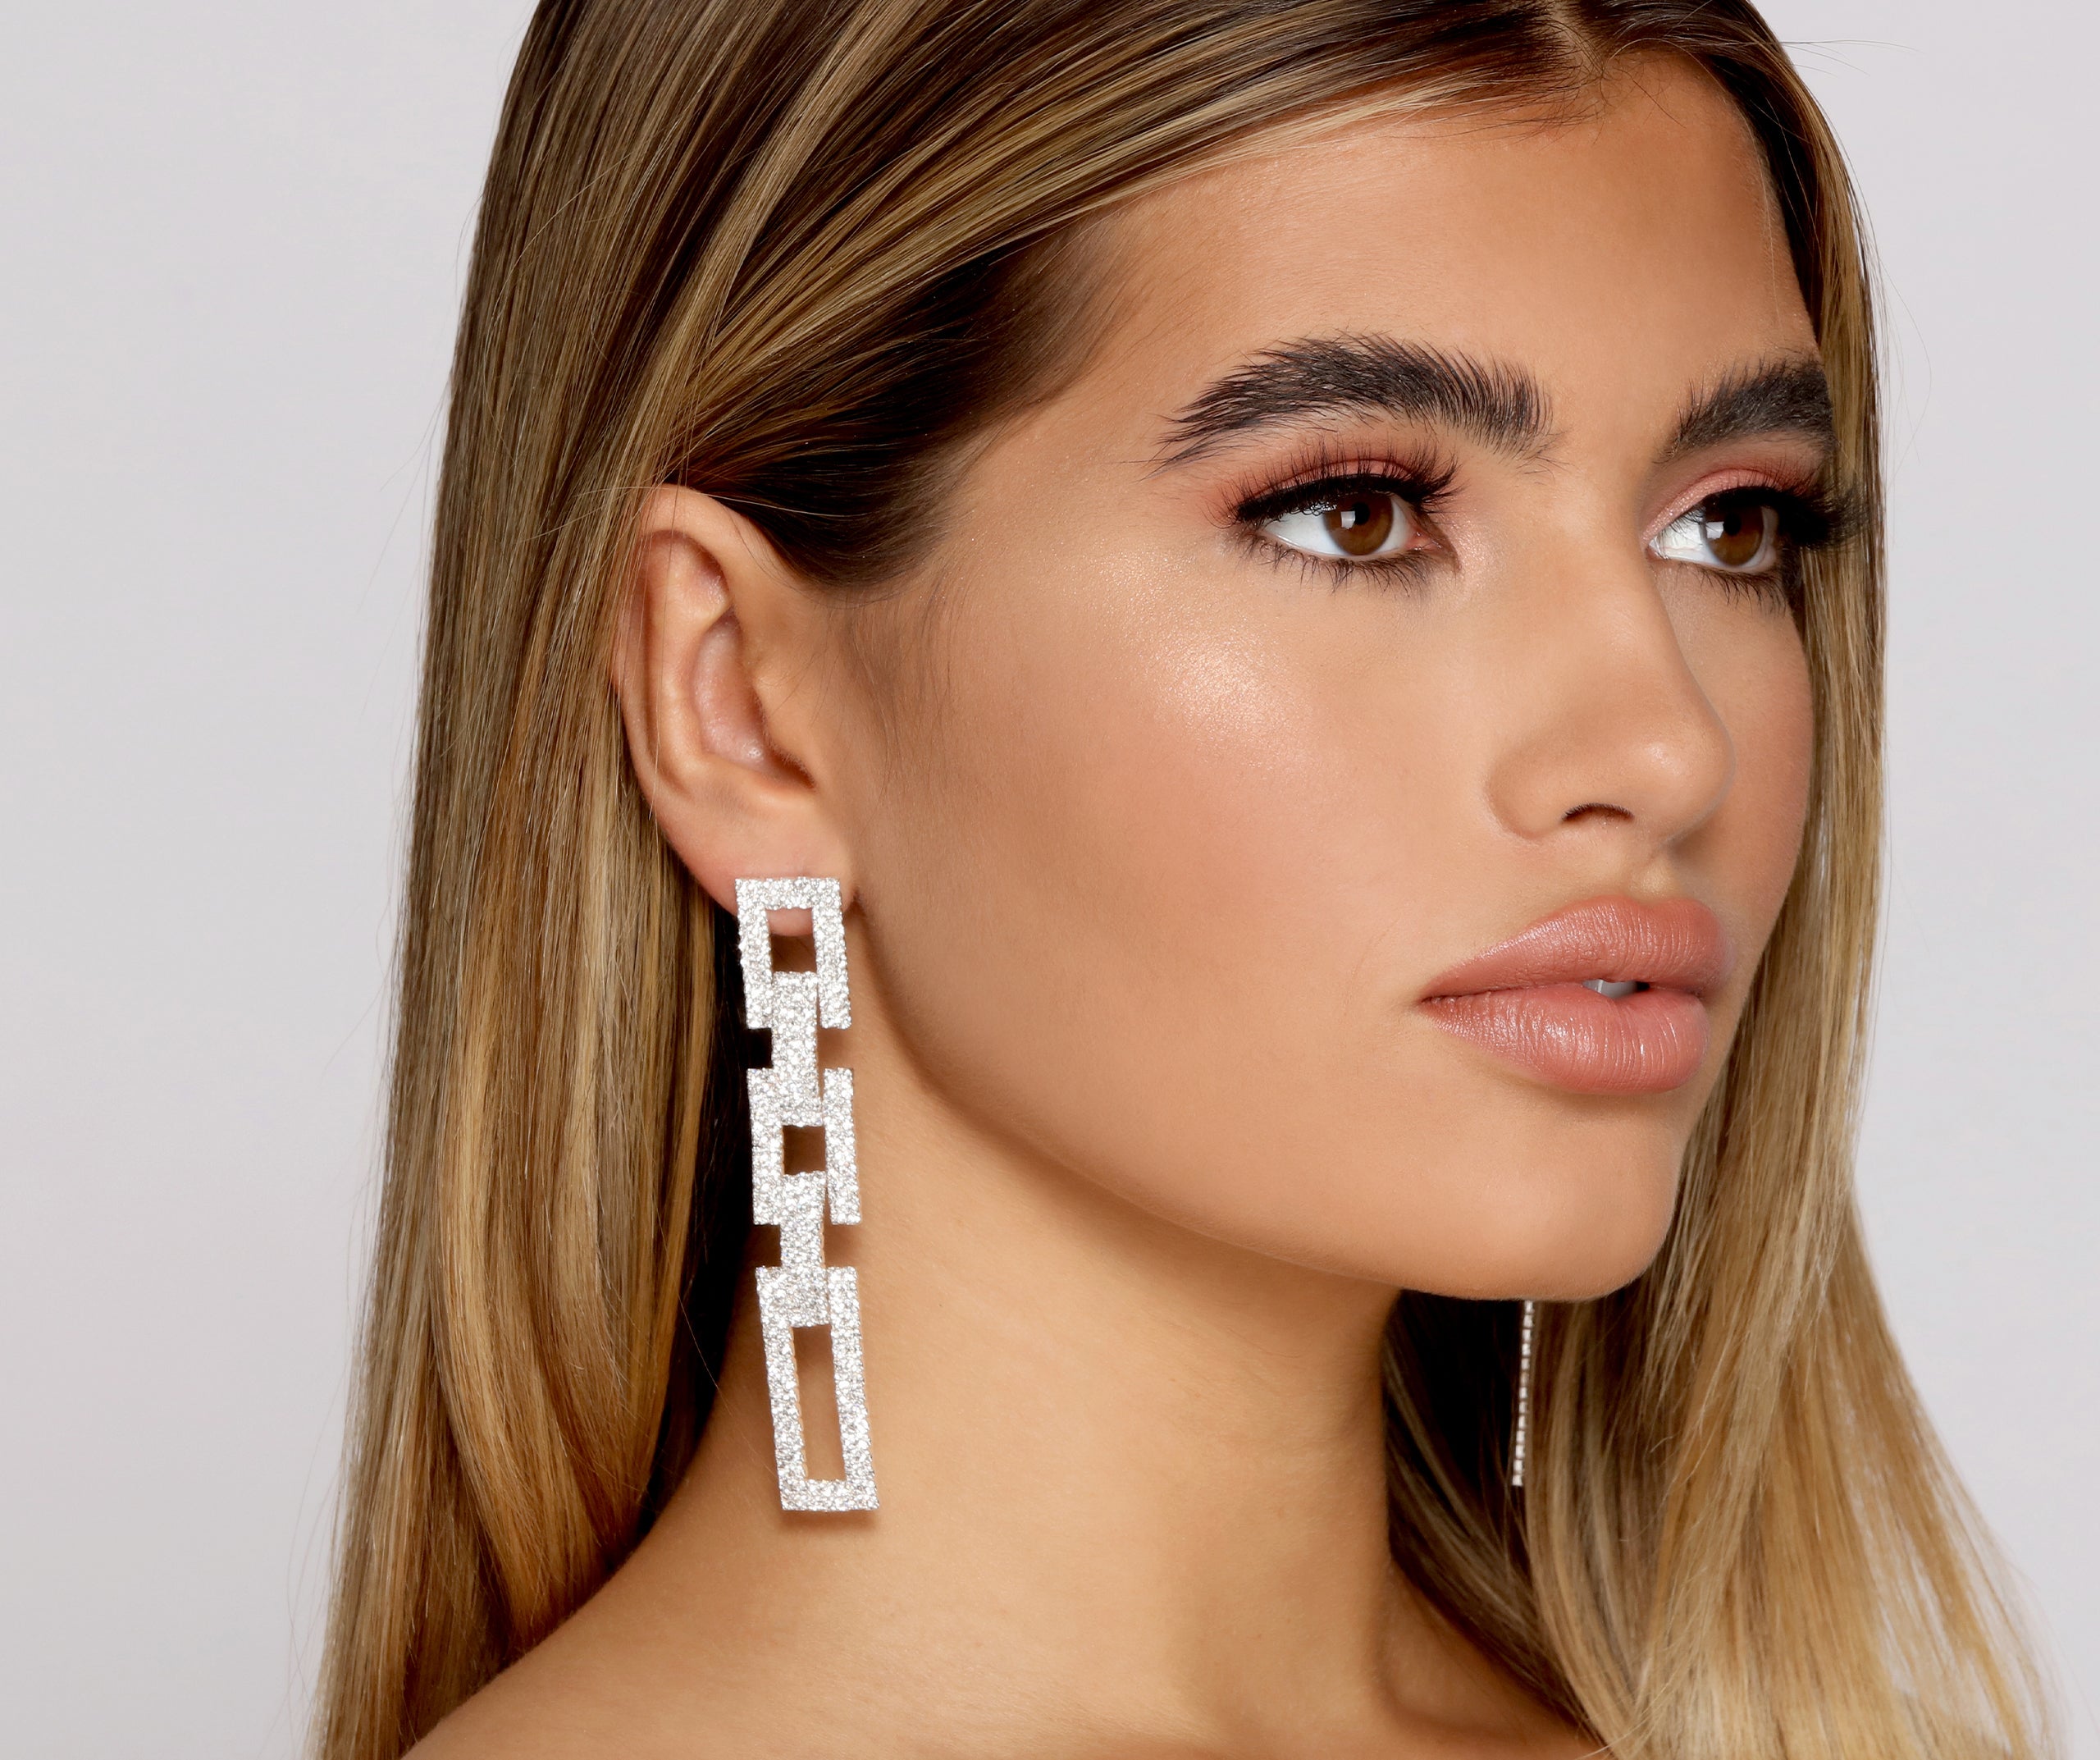 Radiant And Chic Statement Earrings